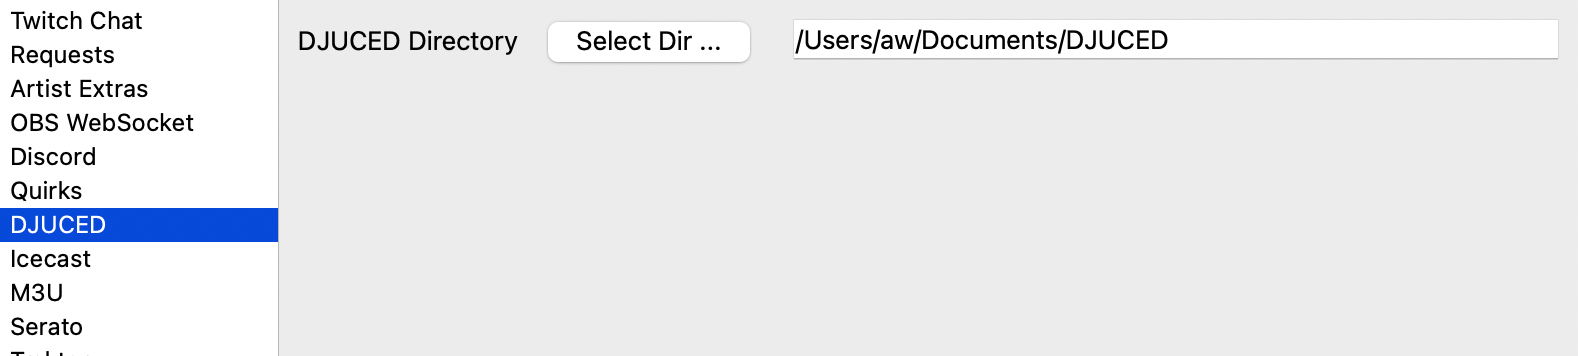 DJUCED Directory Selection